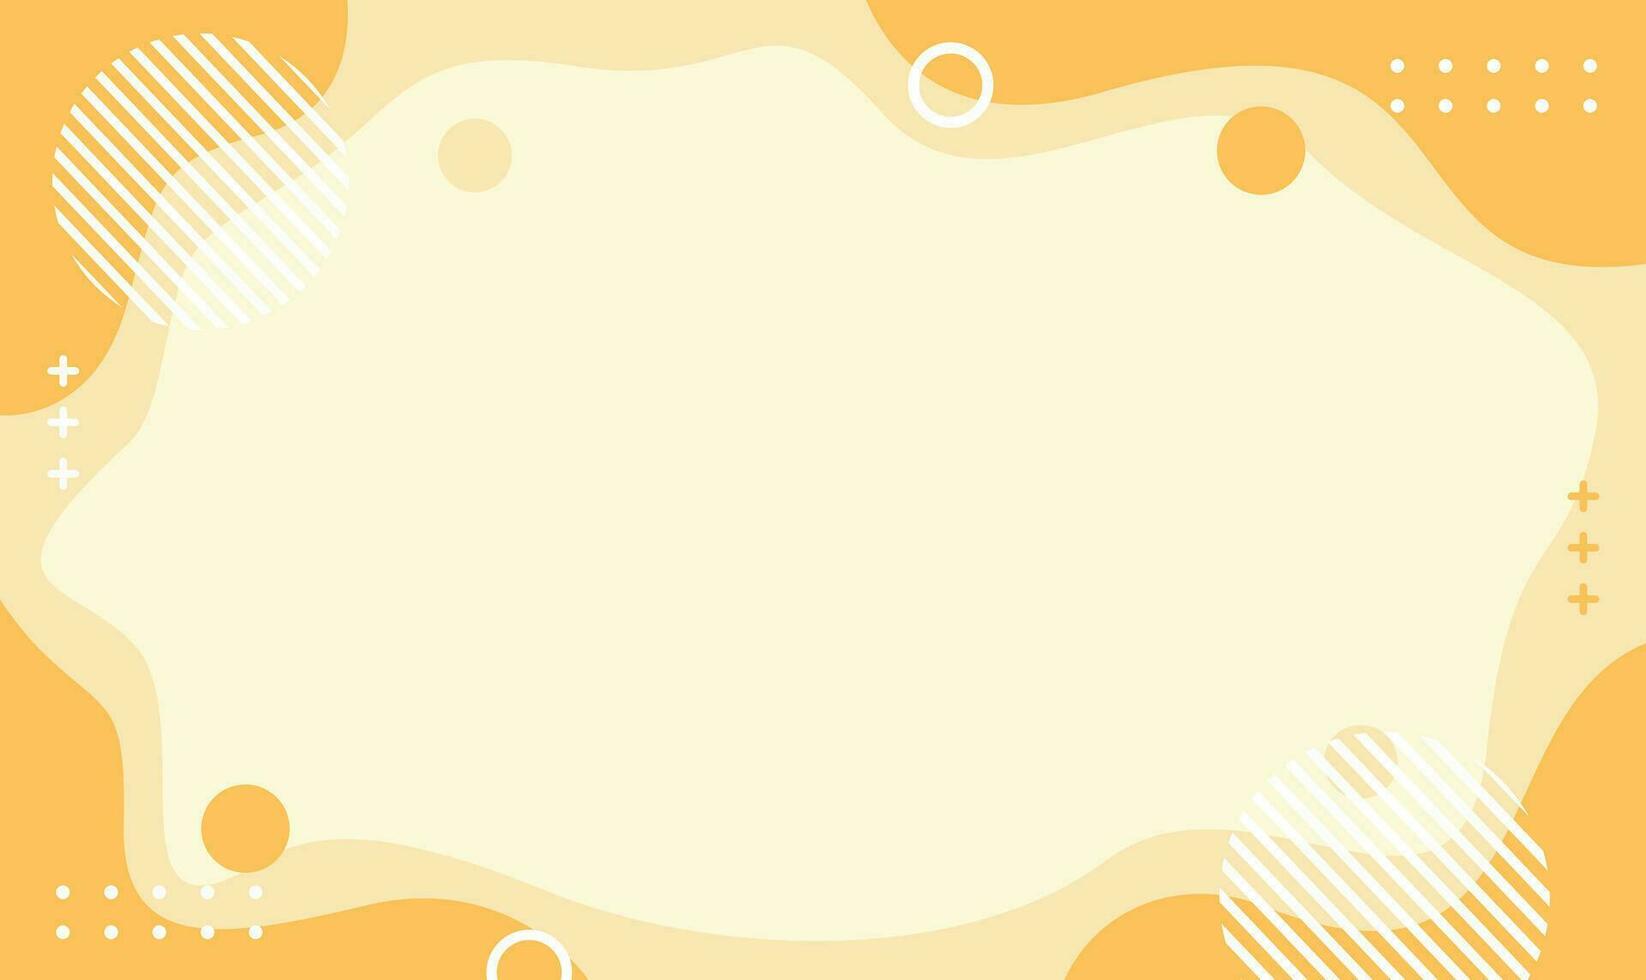 Abstract vector background with orange wavy and geometric shapes, Suitable for covers, posters, templates, banners and others